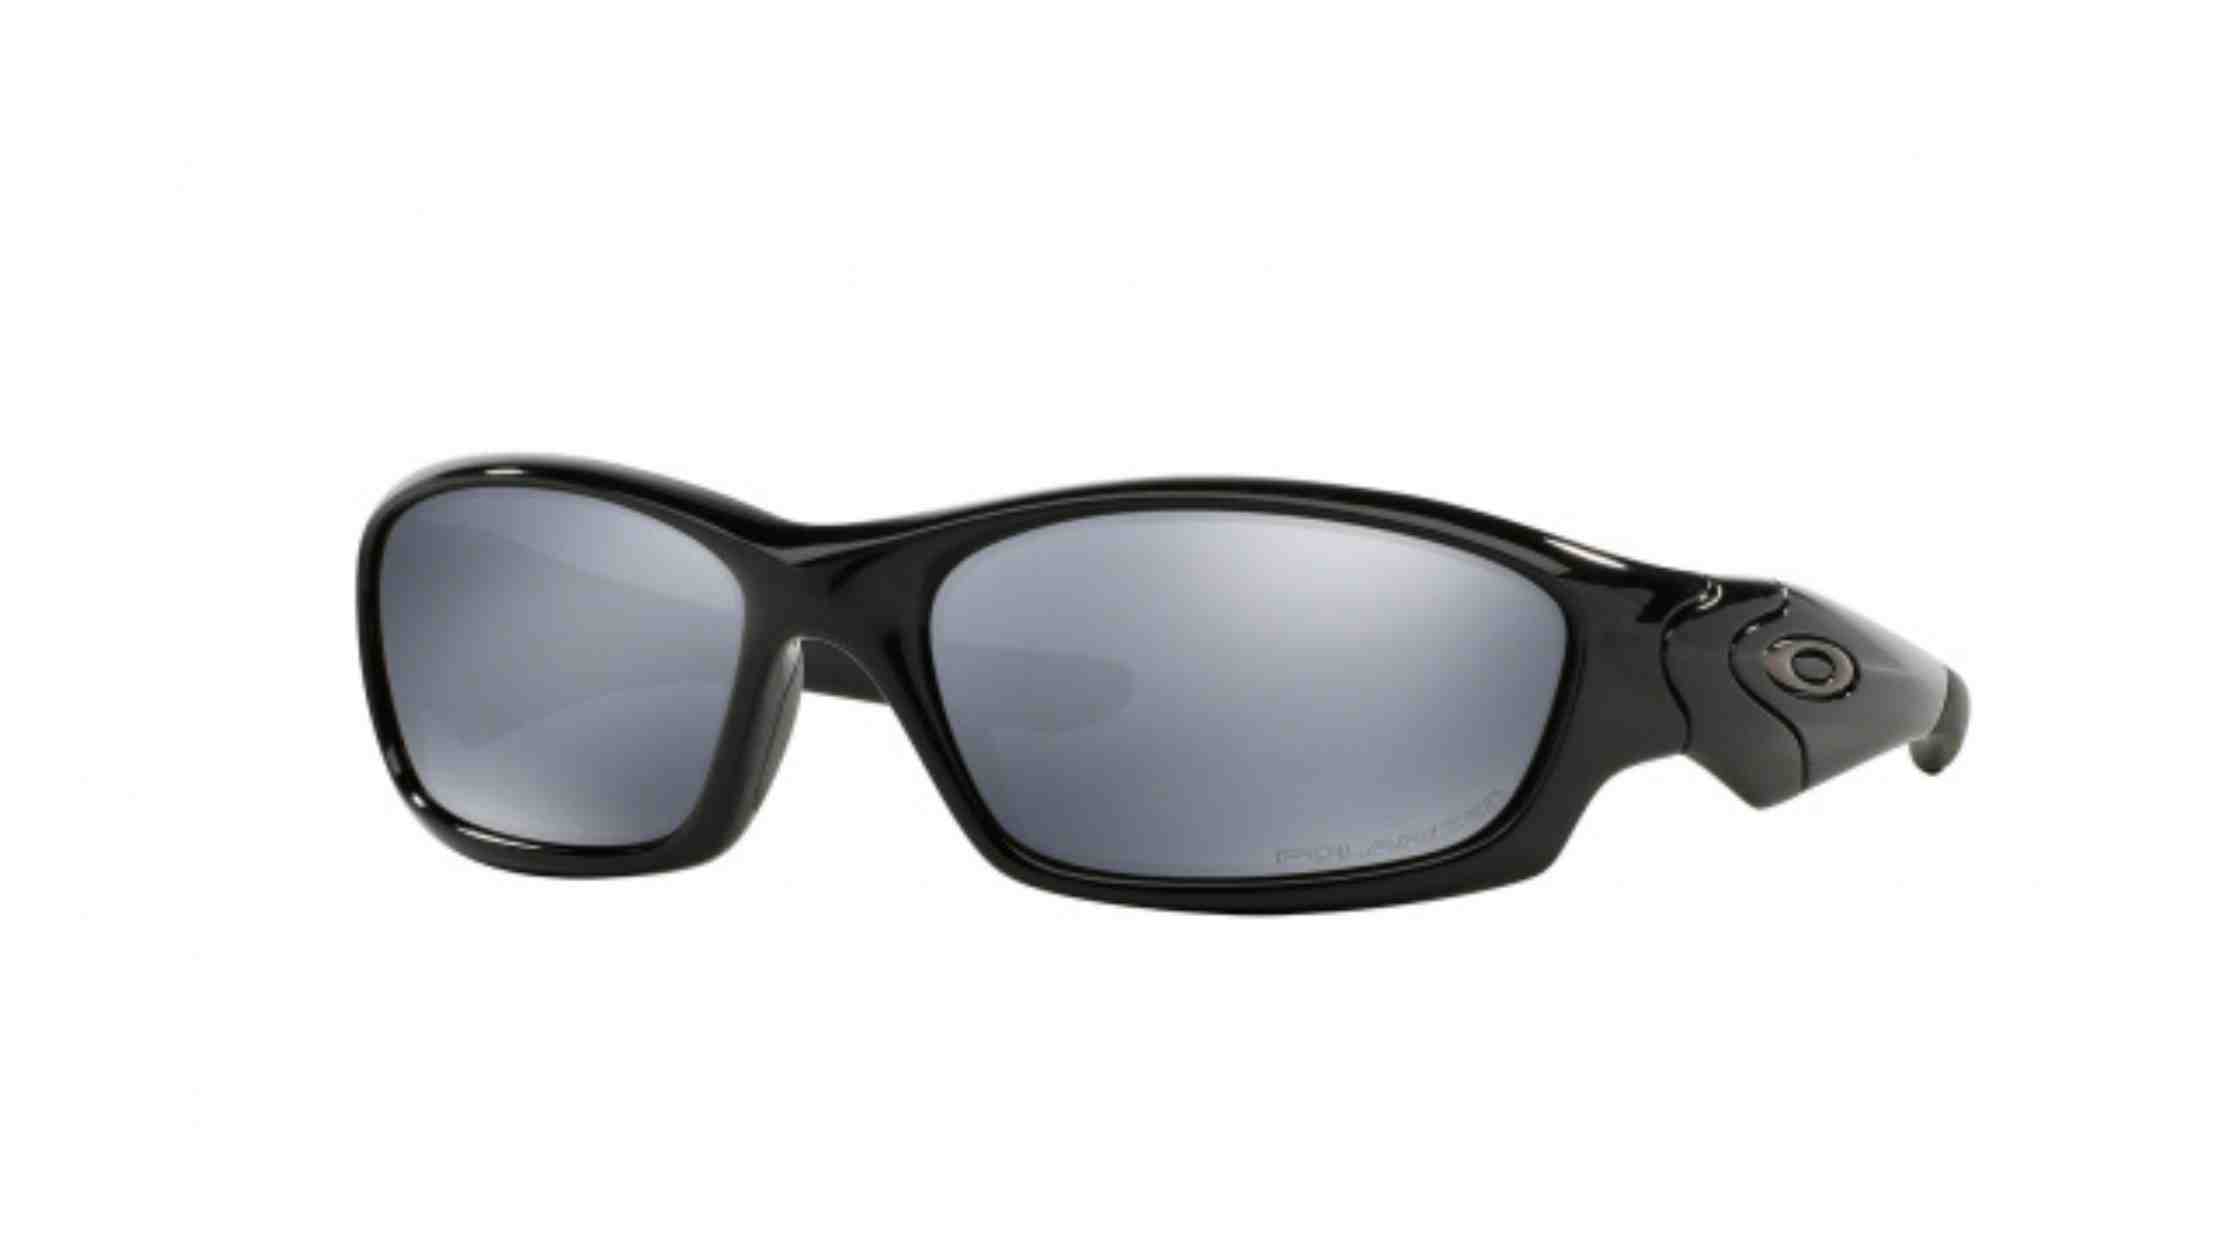 Oakley Sunglasses - Now where find it?